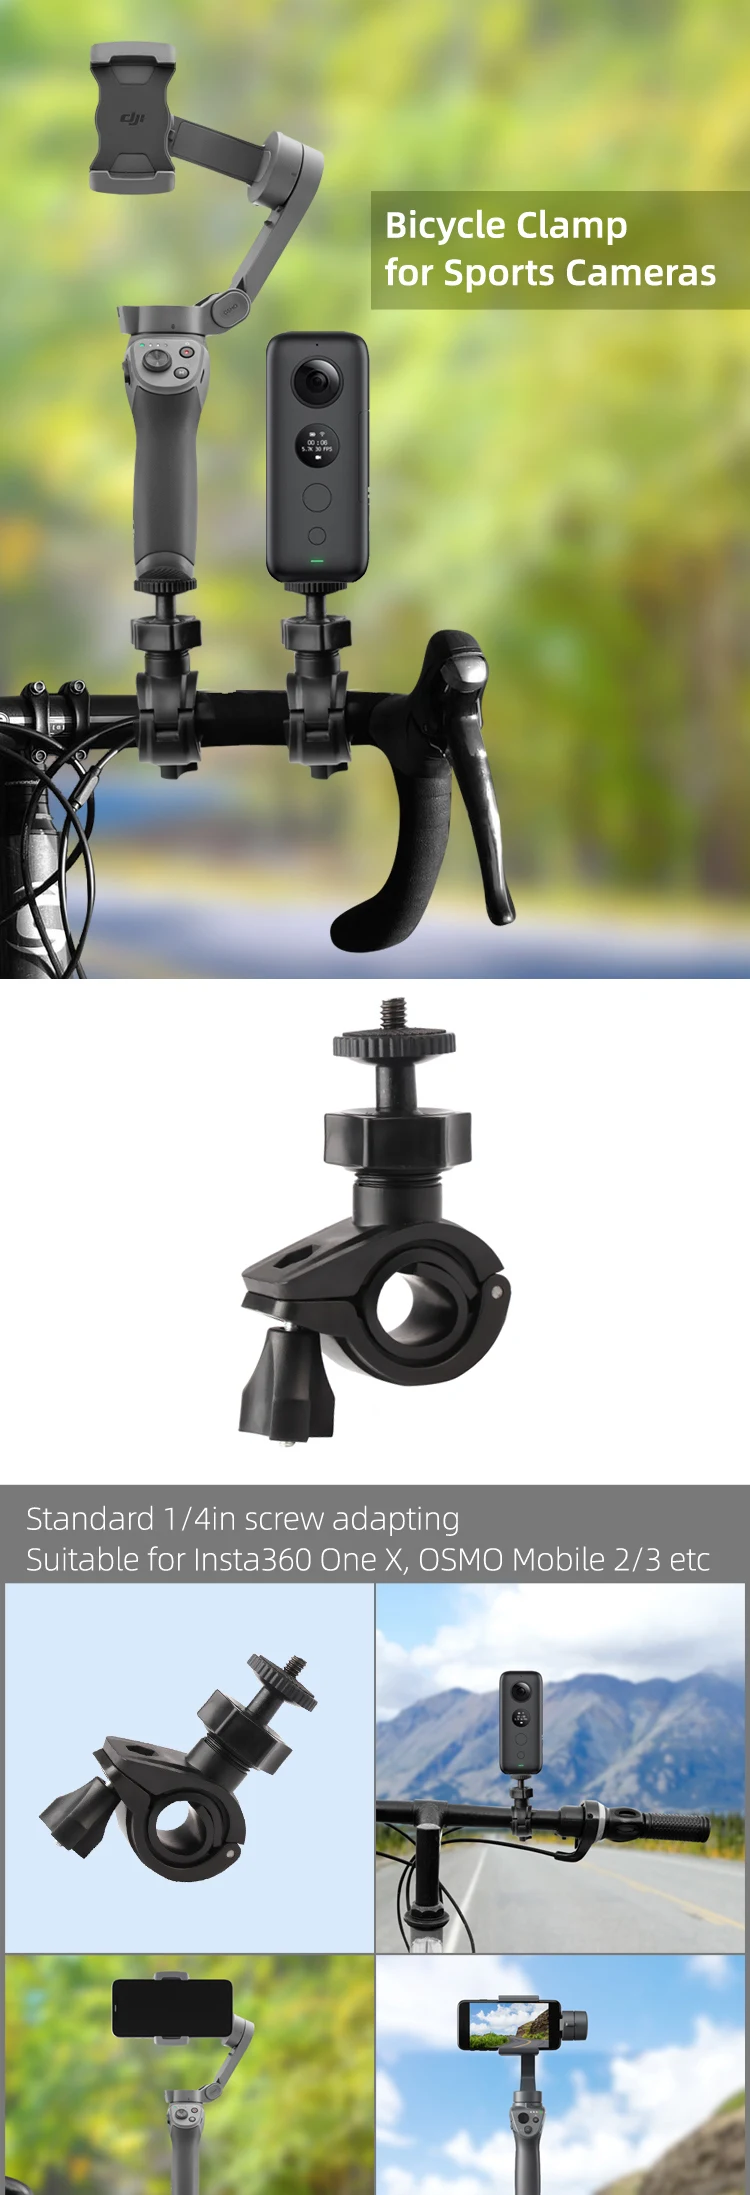 Bicycle Bike Clamp Mount Holder Clip for OSMO Mobile 3 2/Zhiyun Smooth Q 4 Insta360 One X Gopro Hero 5 4 Action Camera